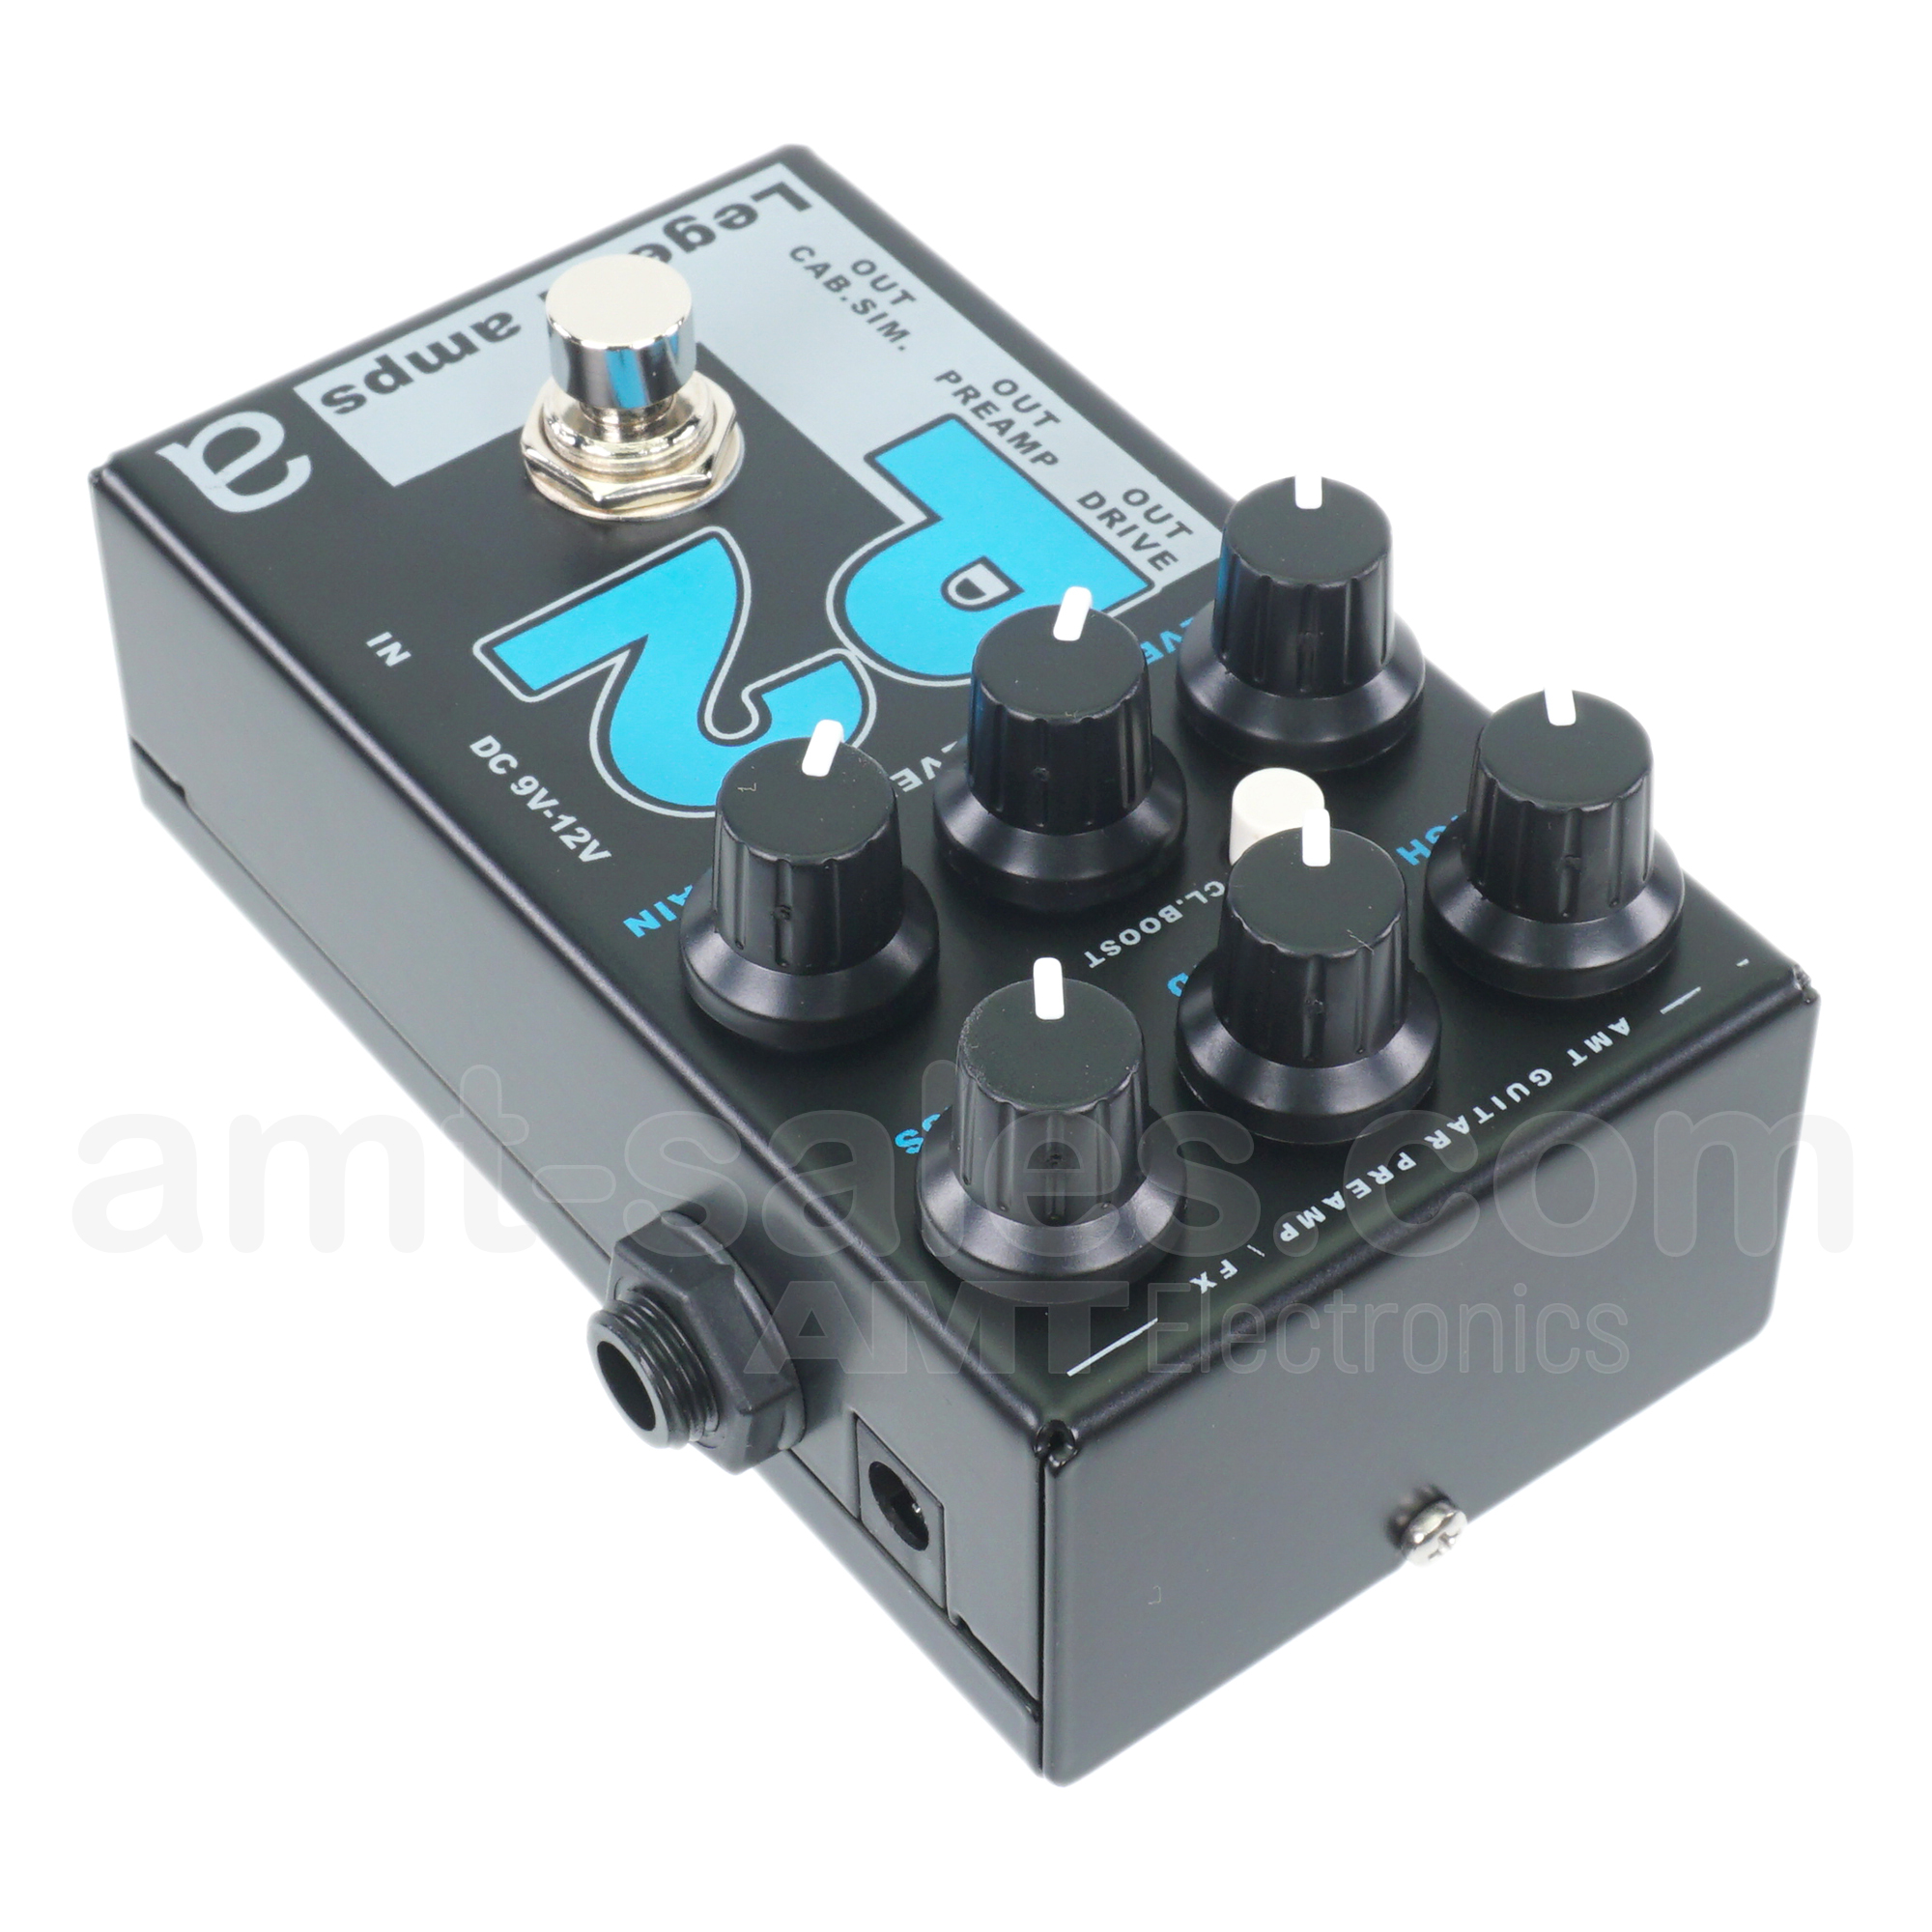 PRE-ORDER! AMT P2 - 2 channels guitar preamp/distortion pedal (Peavey)  (without power supply!)